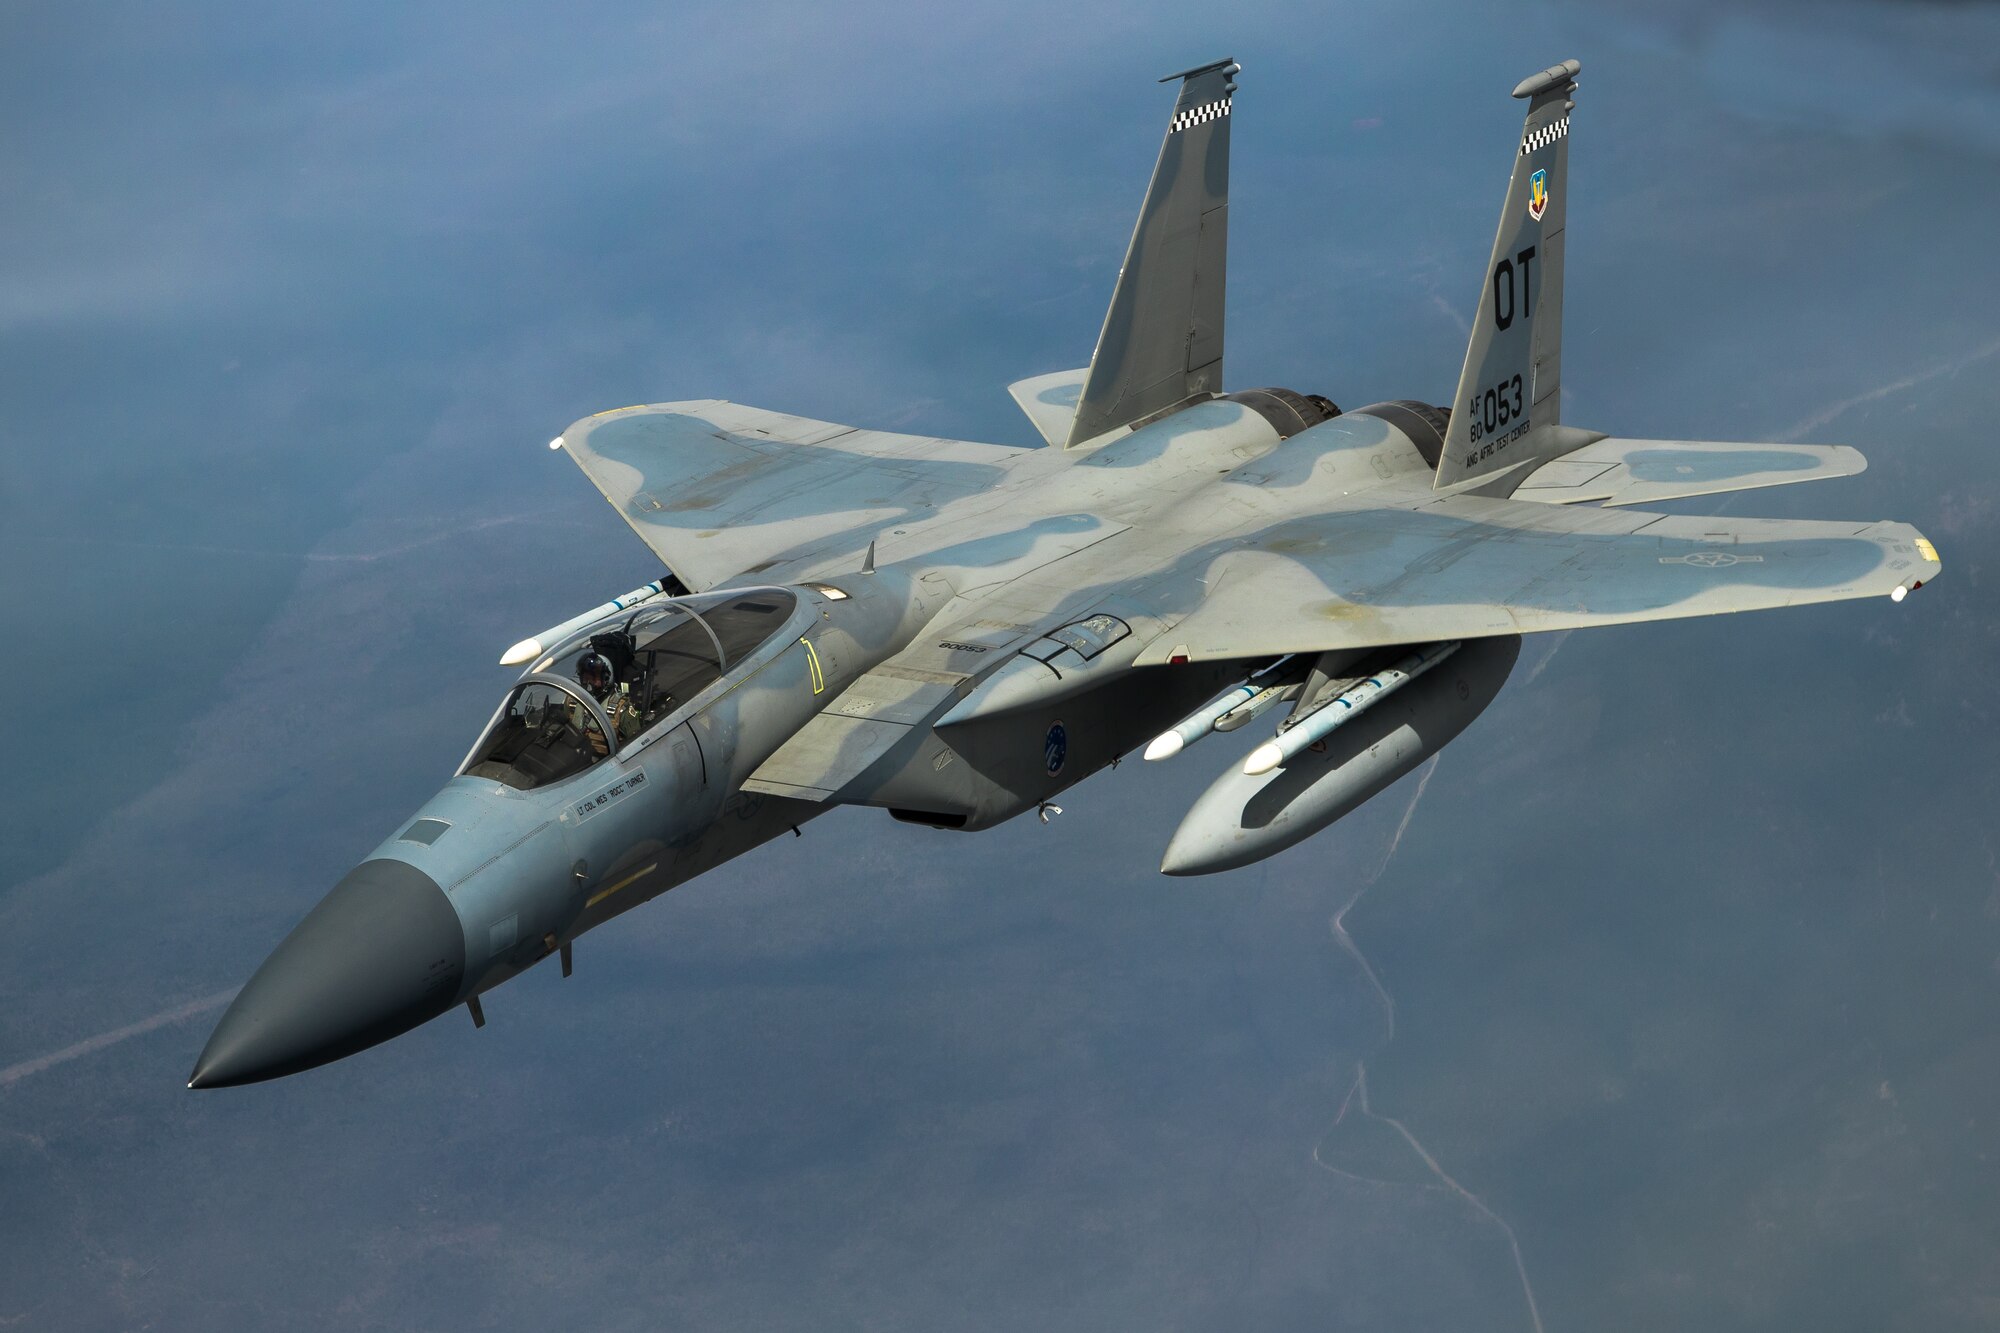 An F-15 from the 85th Test and Evaluation Squadron, 53rd Wing, out of Eglin Air Force Base, Florida conducts aerial refueling operations above the skies of Northern California, May 14. The aircraft participated in the Northern Edge 21 exercise in Alaska earlier in May. (Air Force photo by Ethan Wagner)